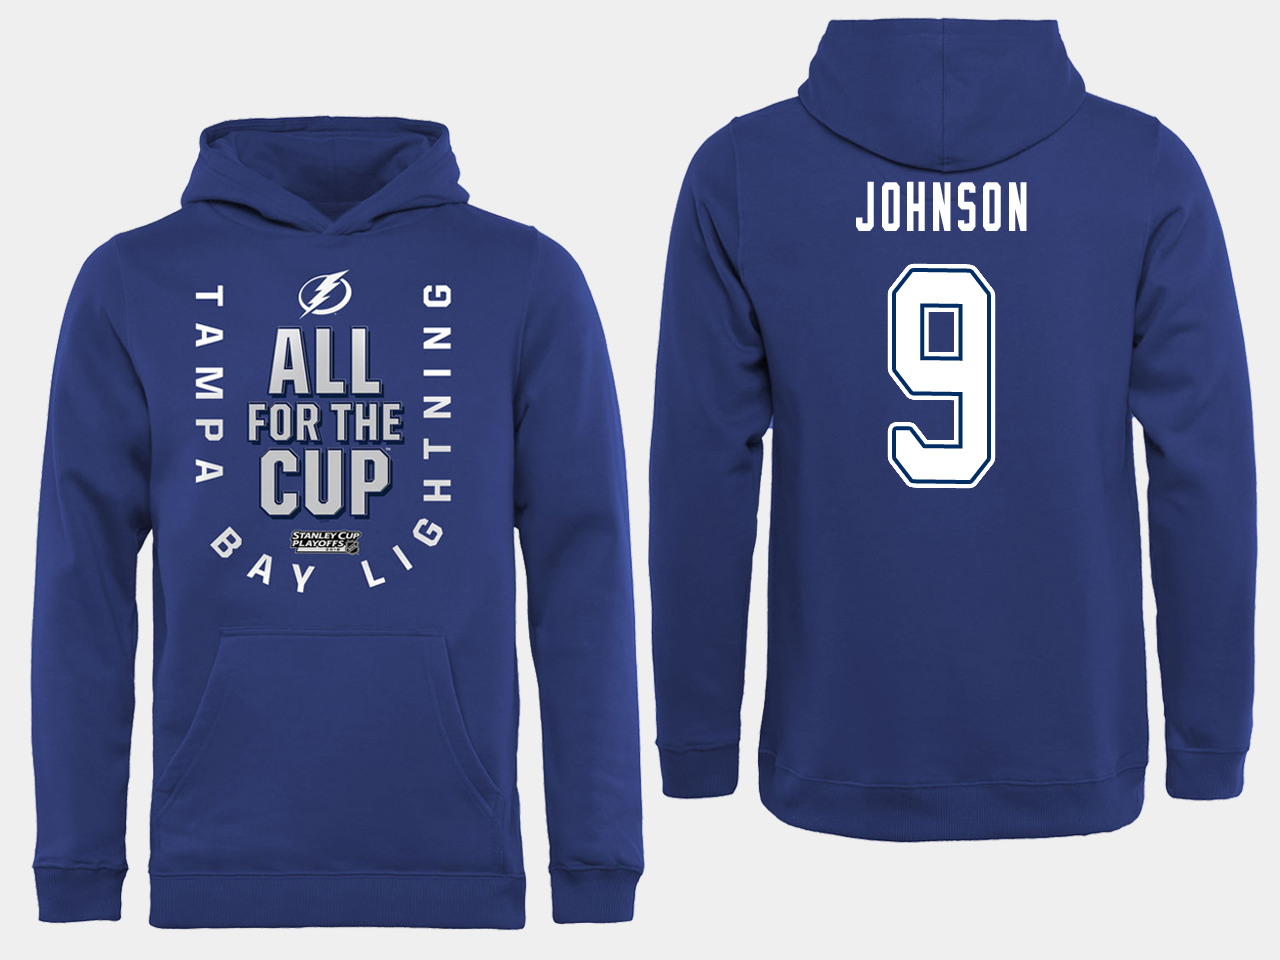 NHL Men adidas Tampa Bay Lightning 9 Johnson blue All for the Cup Hoodie